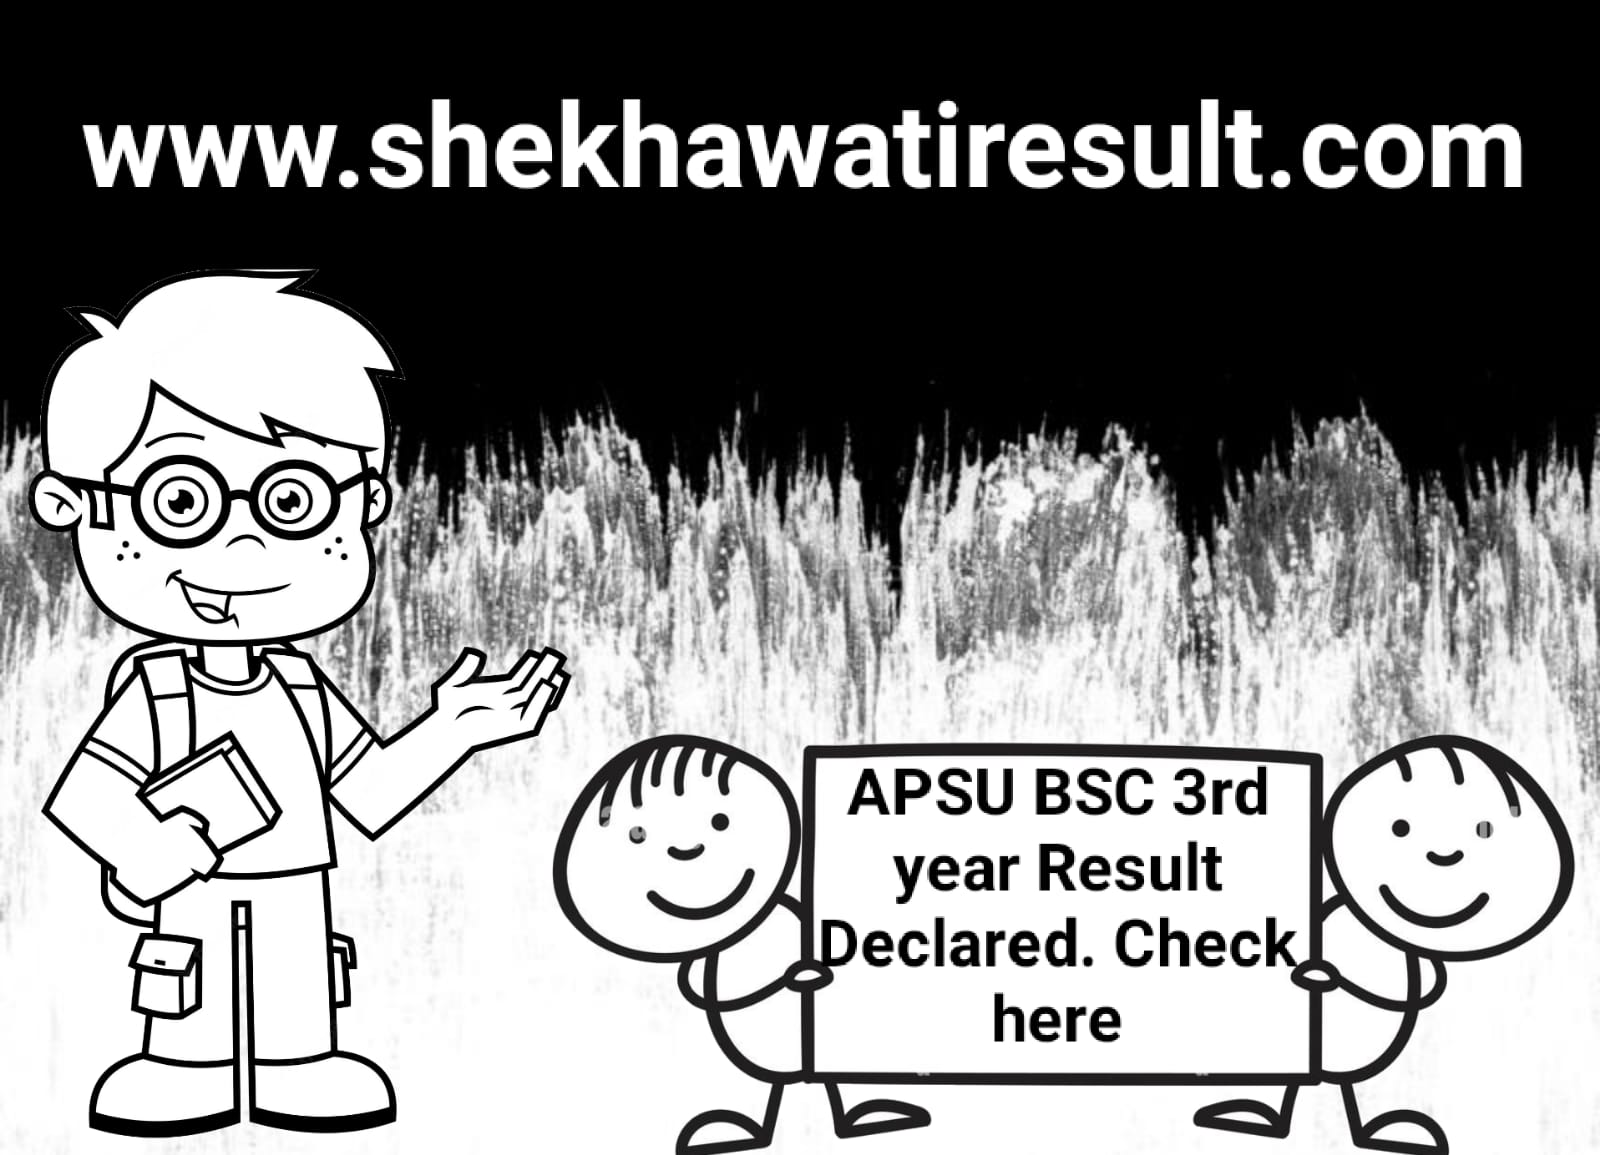 APSU BSC 3rd year Result